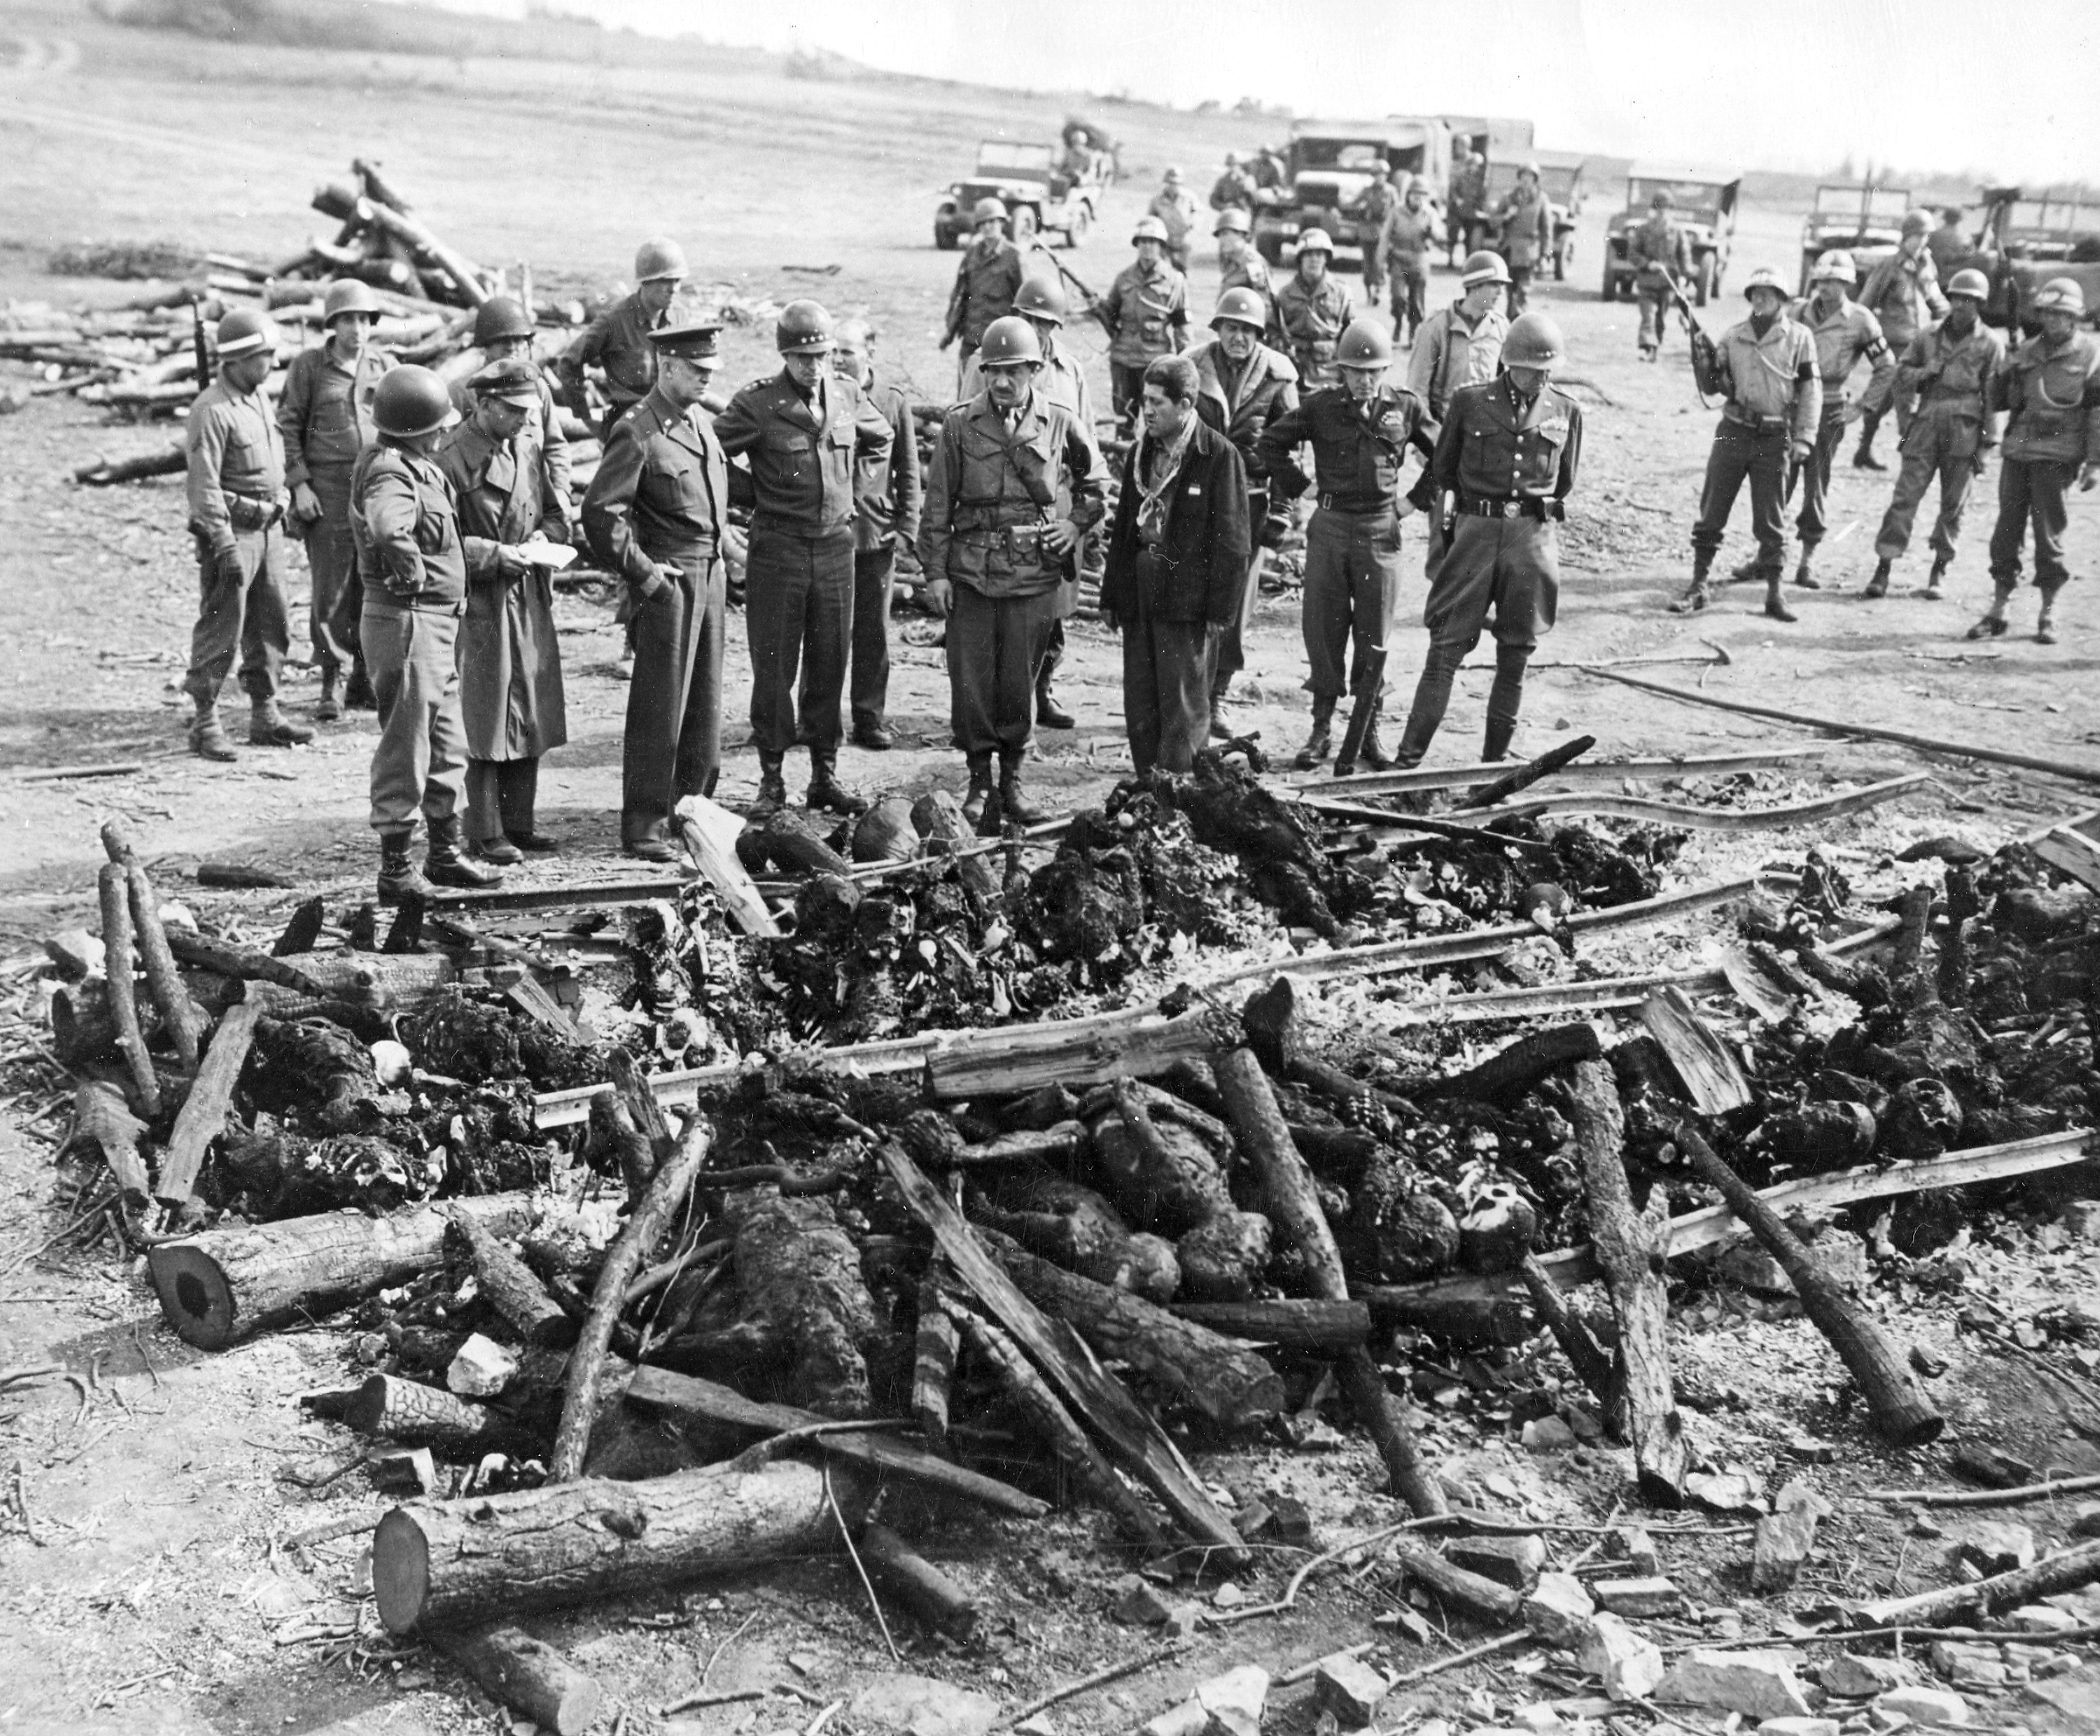 Dwight Eisenhower and other officers inspecting the remains of a German attempt to destroy the remains of dead Jewish prisoners at Ohrdruf Concentration Camp, Gotha, Germany, 12 Apr 1945